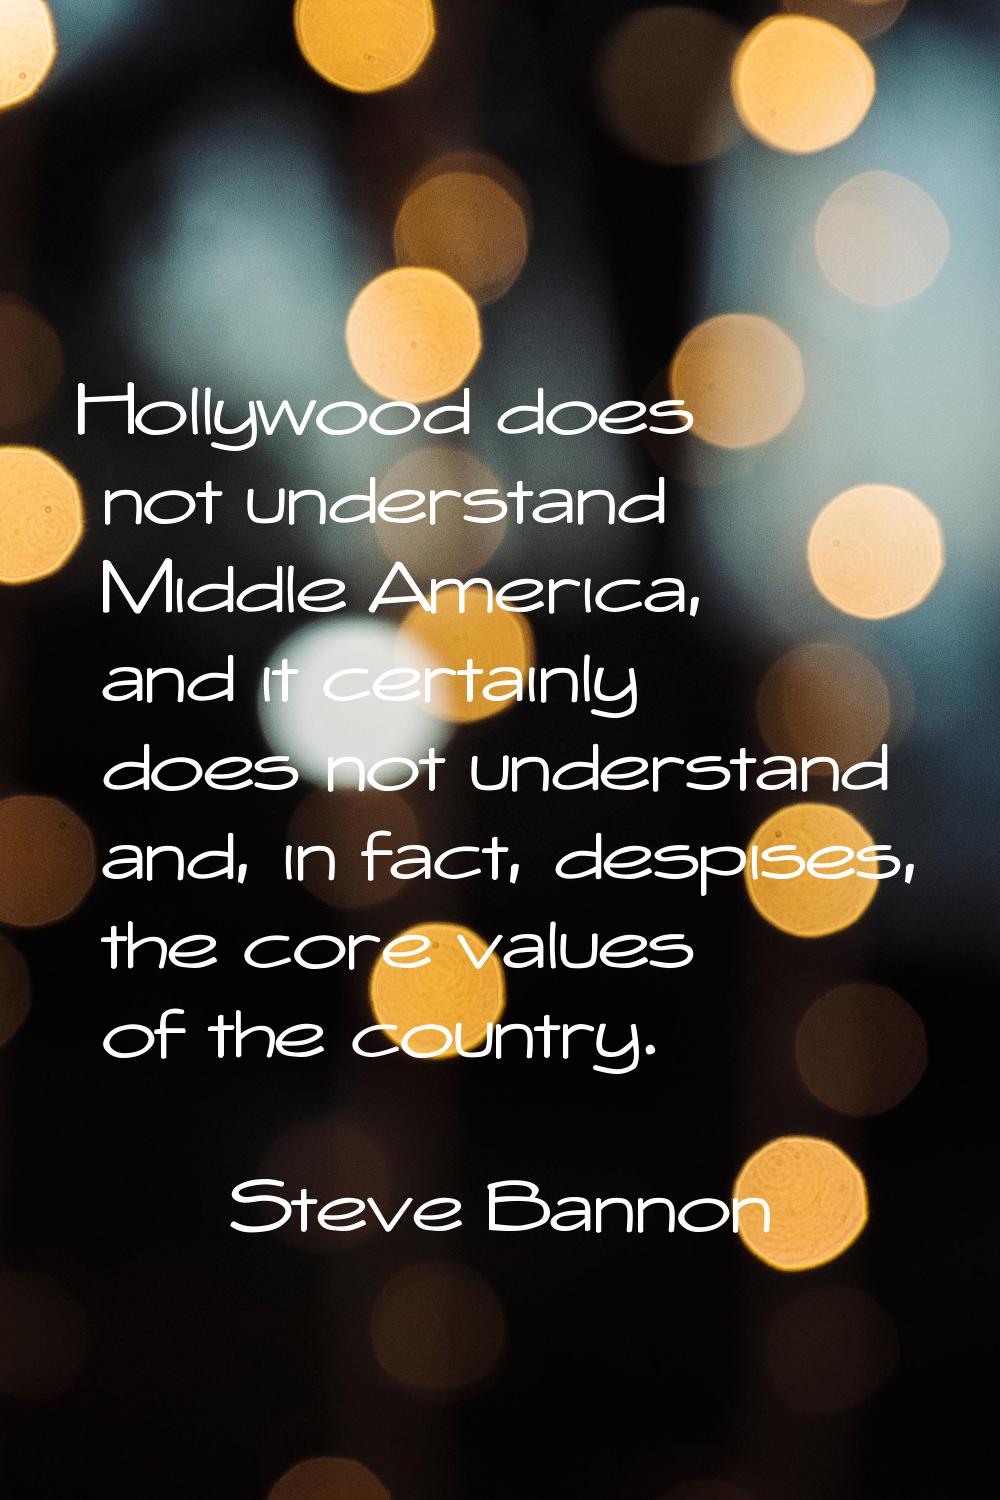 Hollywood does not understand Middle America, and it certainly does not understand and, in fact, de